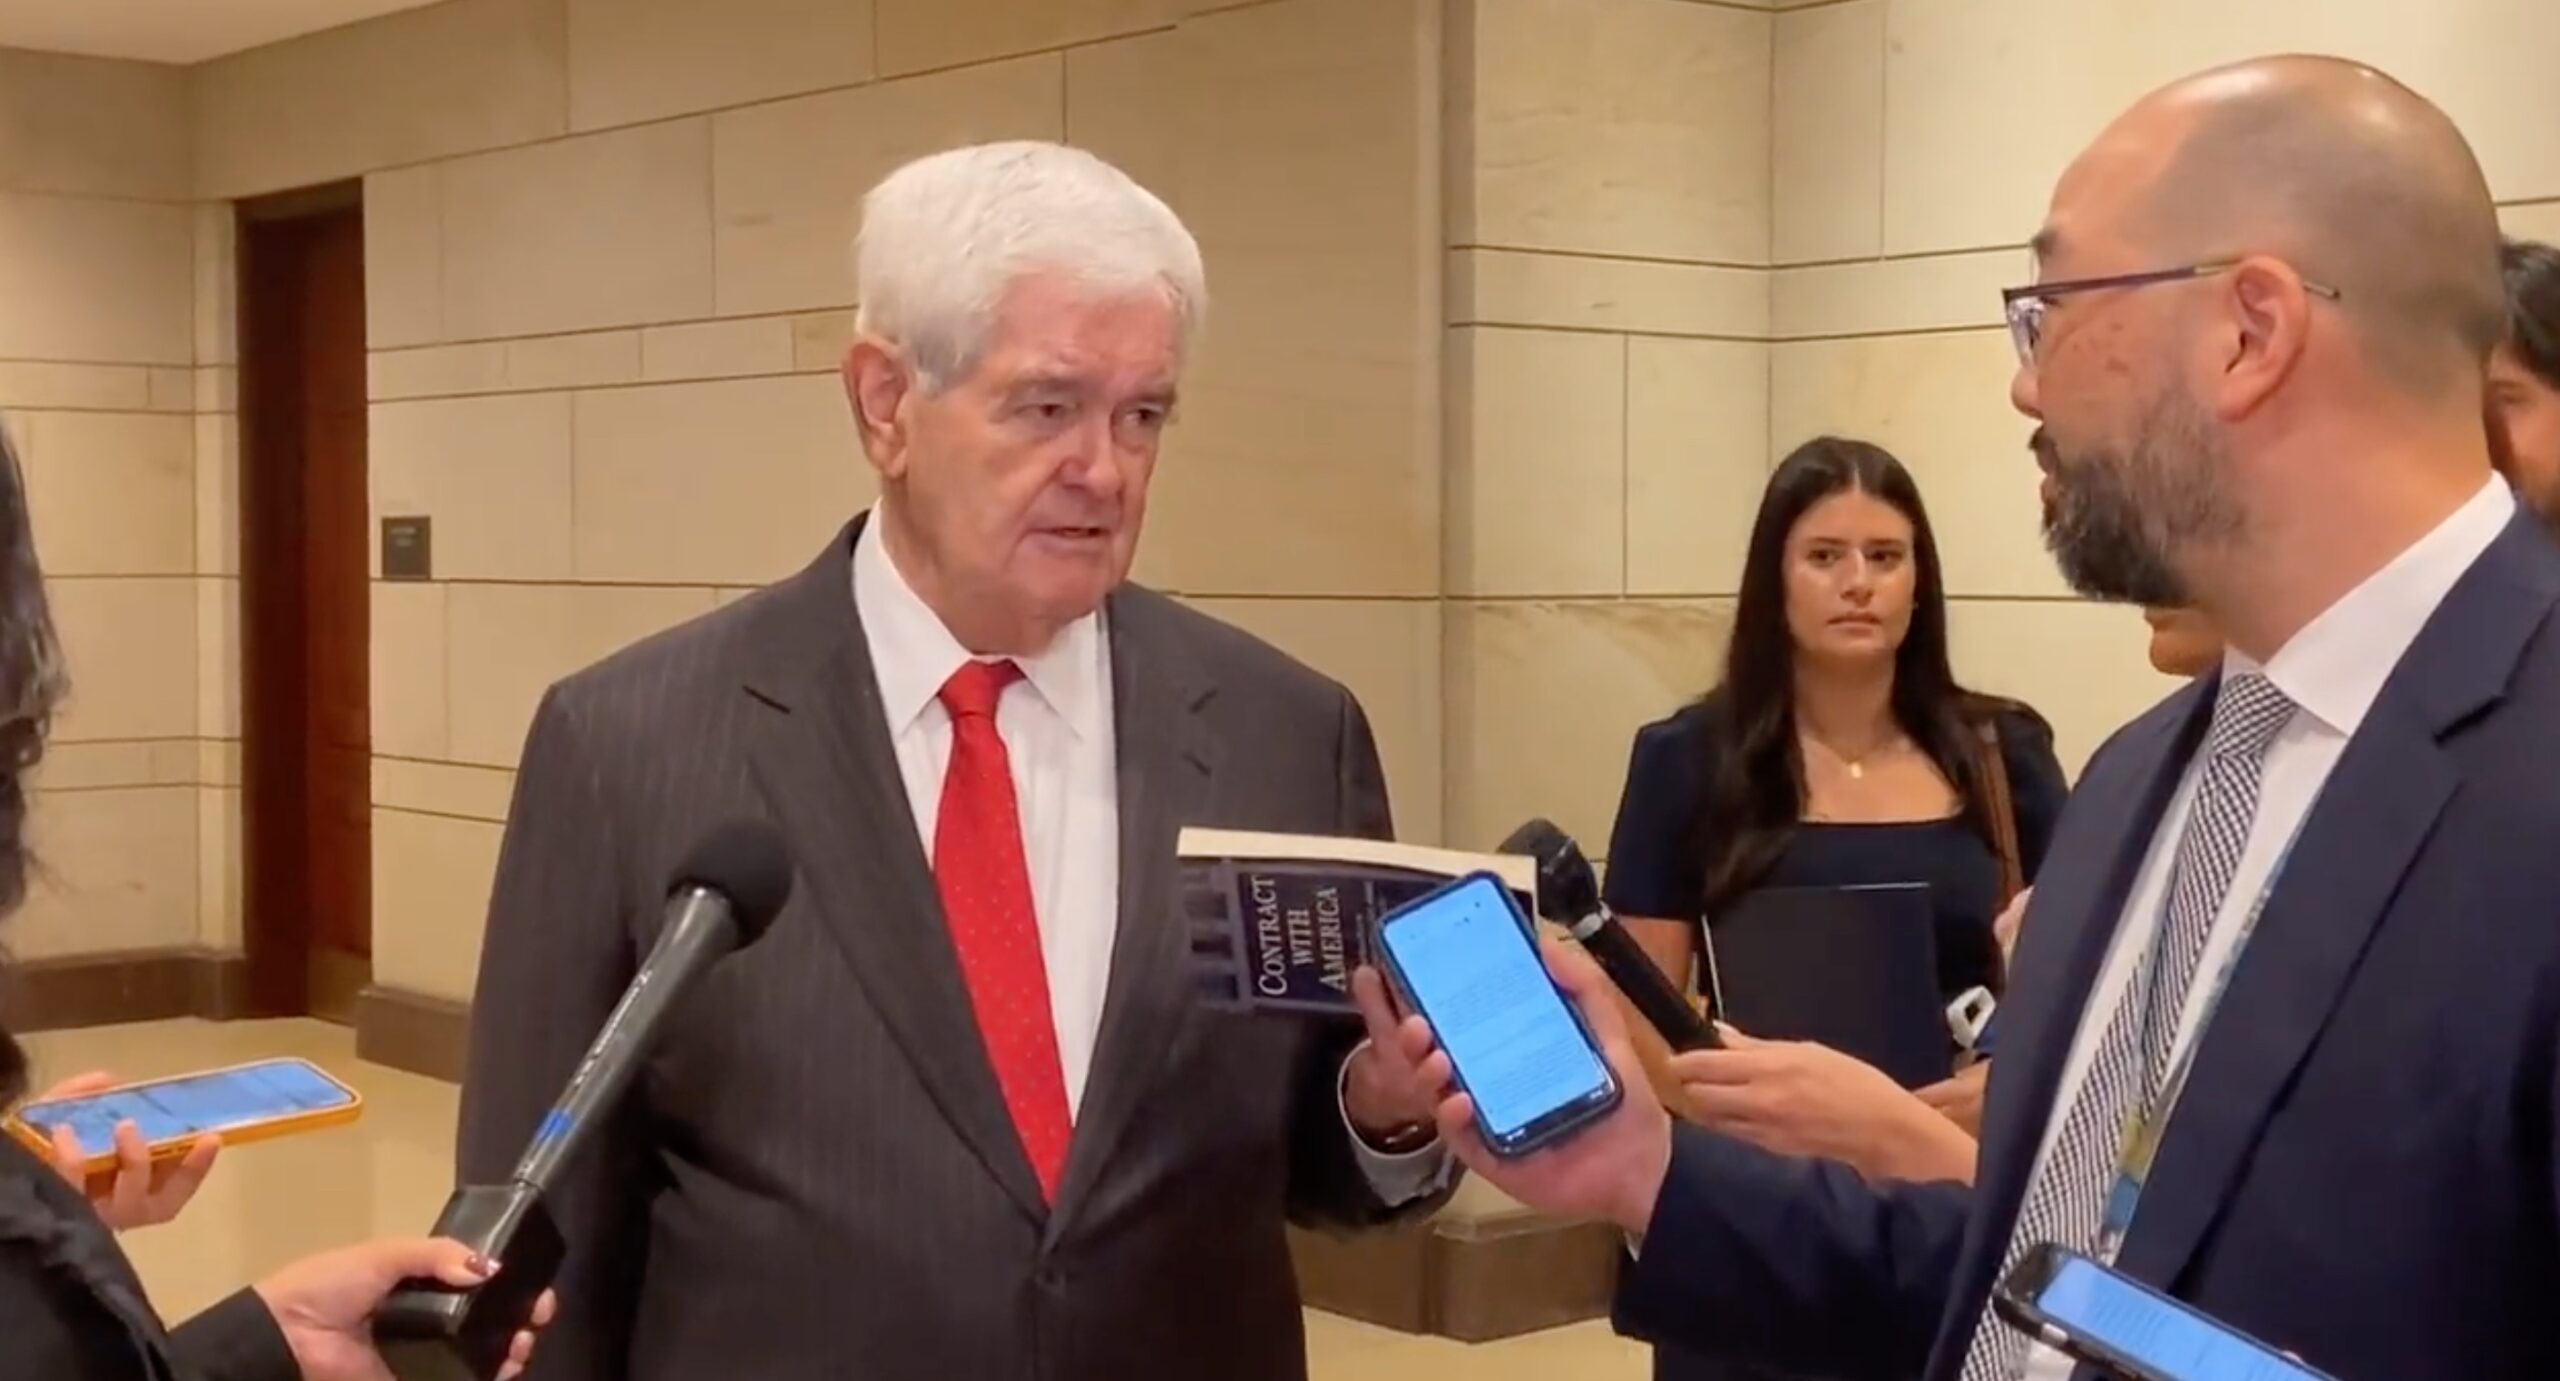 Newt Gingrich Insults NBC News Reporter When Asked What He Thinks of January 6 Committee (mediaite.com)